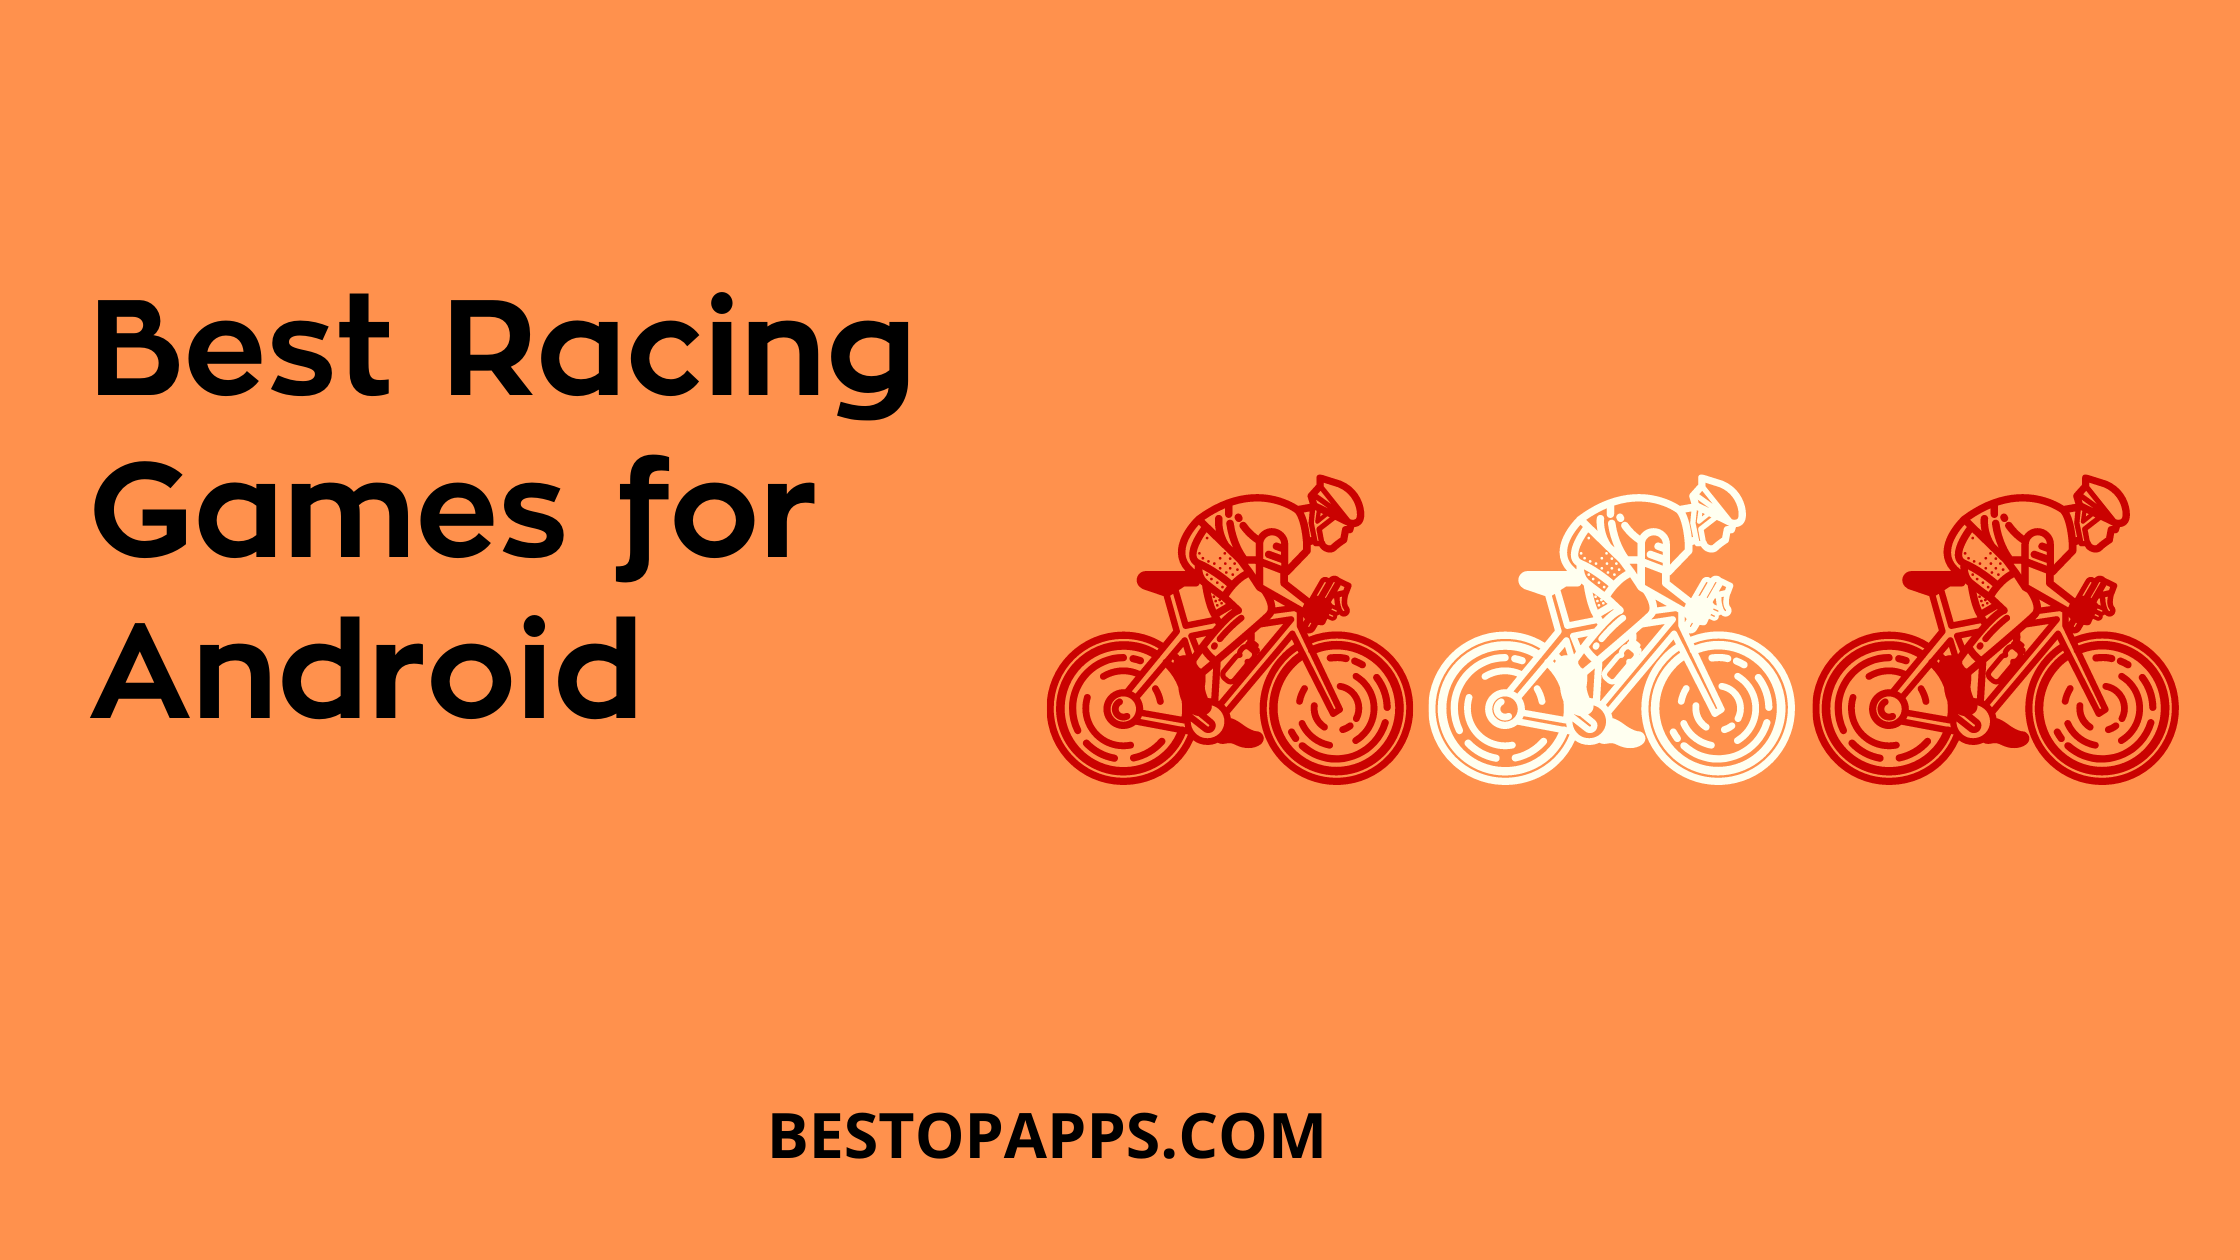 Best Racing Games for Android in 2021.